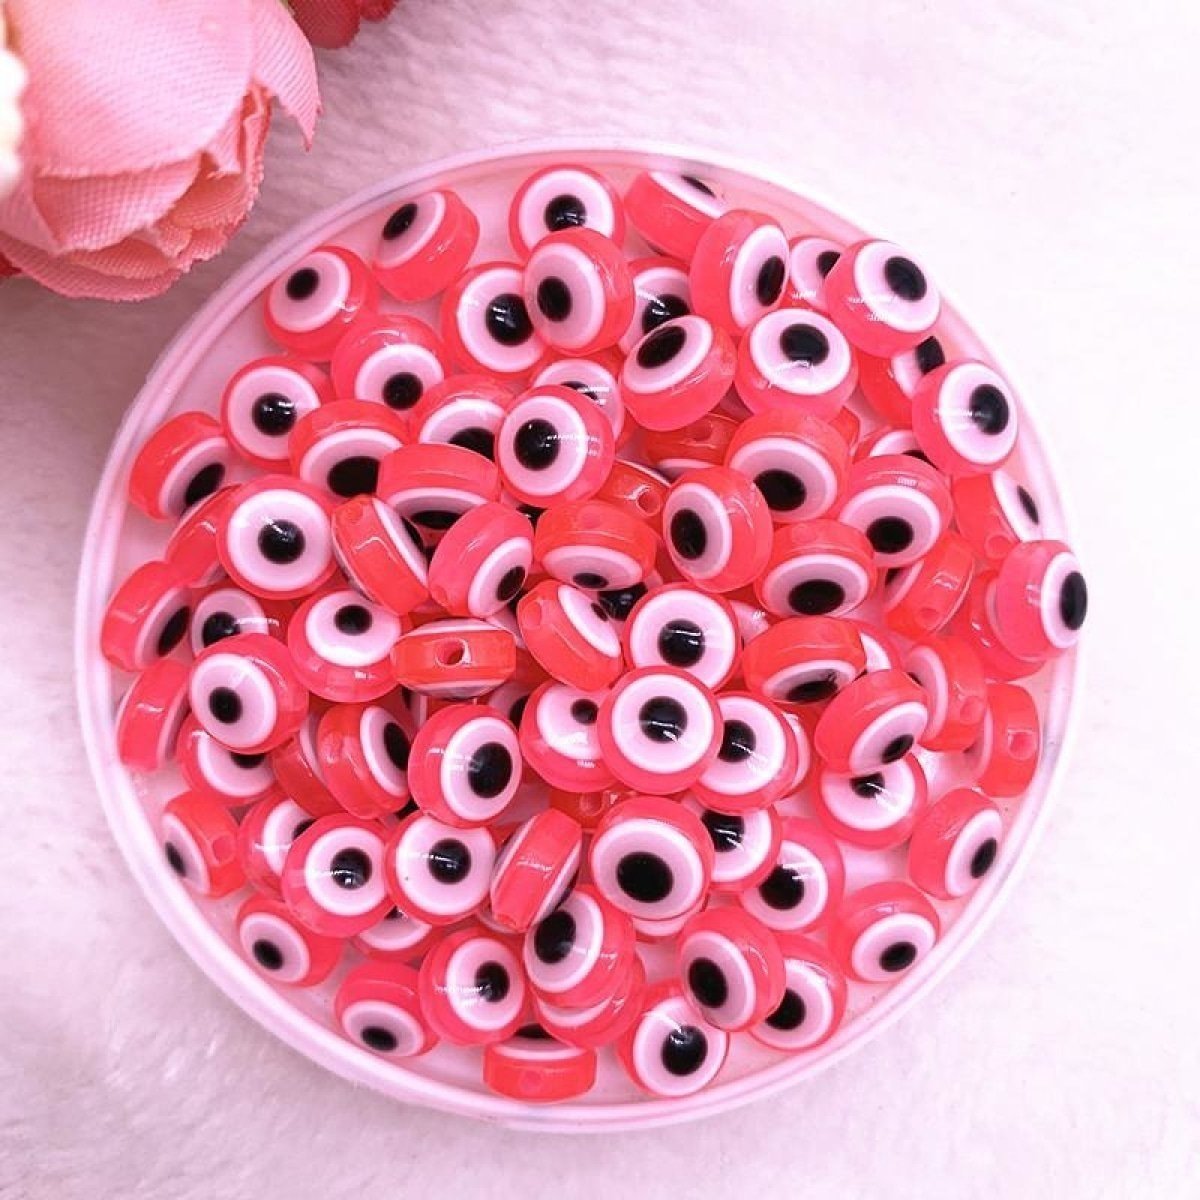 48pcs 8/10mm Resin Spacer Beads Double Sided Eyes for Jewellery Making DIY Bracelet Beads Flat Backed - Deep Pink 8mm - - Asia Sell